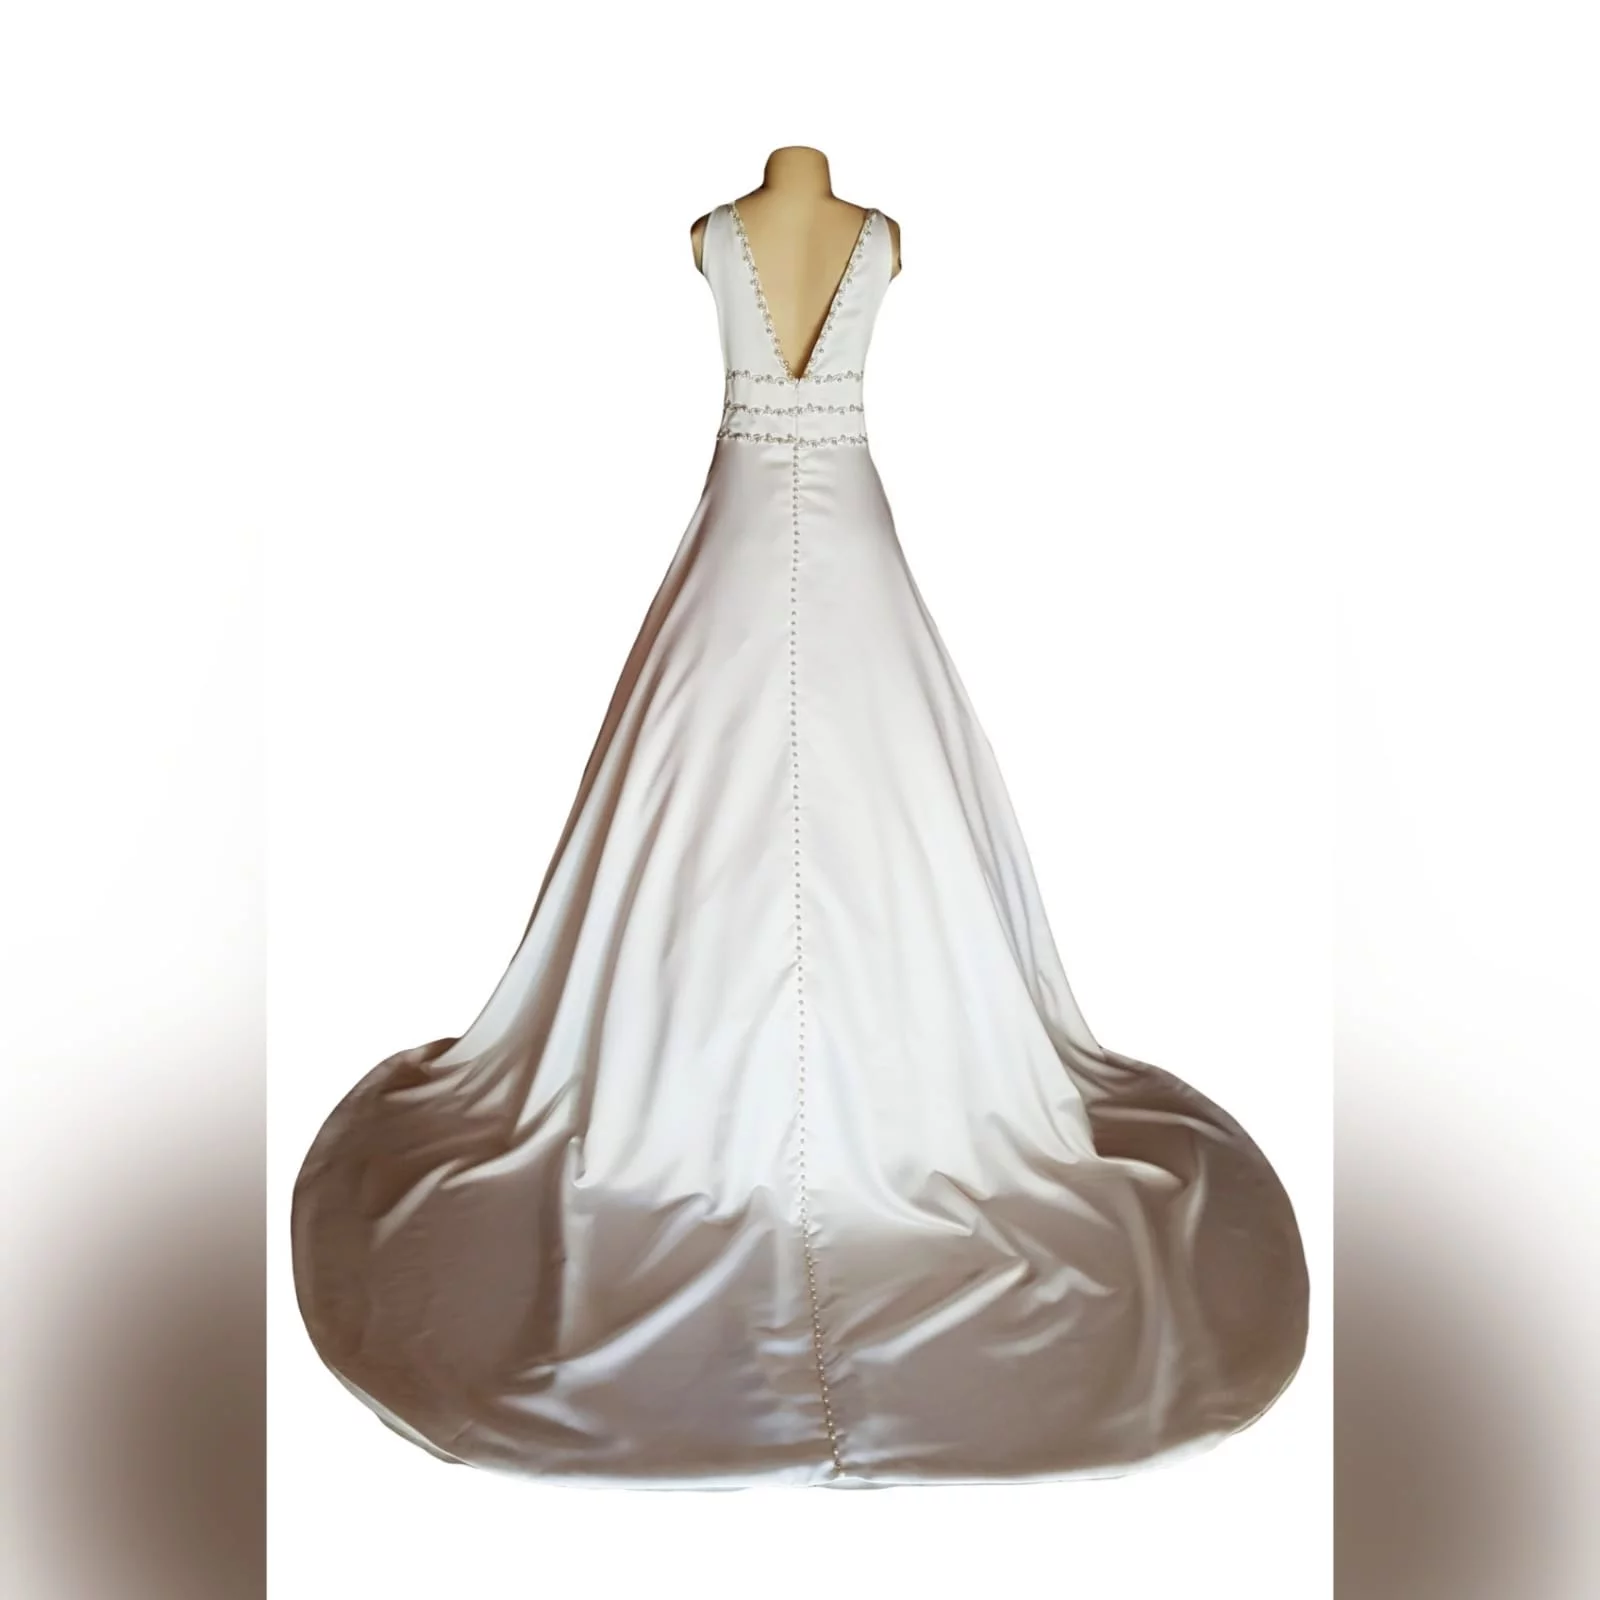 A line brides dress in a pearl satin fabric 17 this elegant wedding dress was designed and made for a wedding in brazil an a-line brides dress in a pearl satin fabric, with an illusion deep neckline and v open back. Detailed with diamante, pearls and buttons. A wide train that hooks up. And a brazilian traditional embroidered inside hem with the bridesmaid's names.